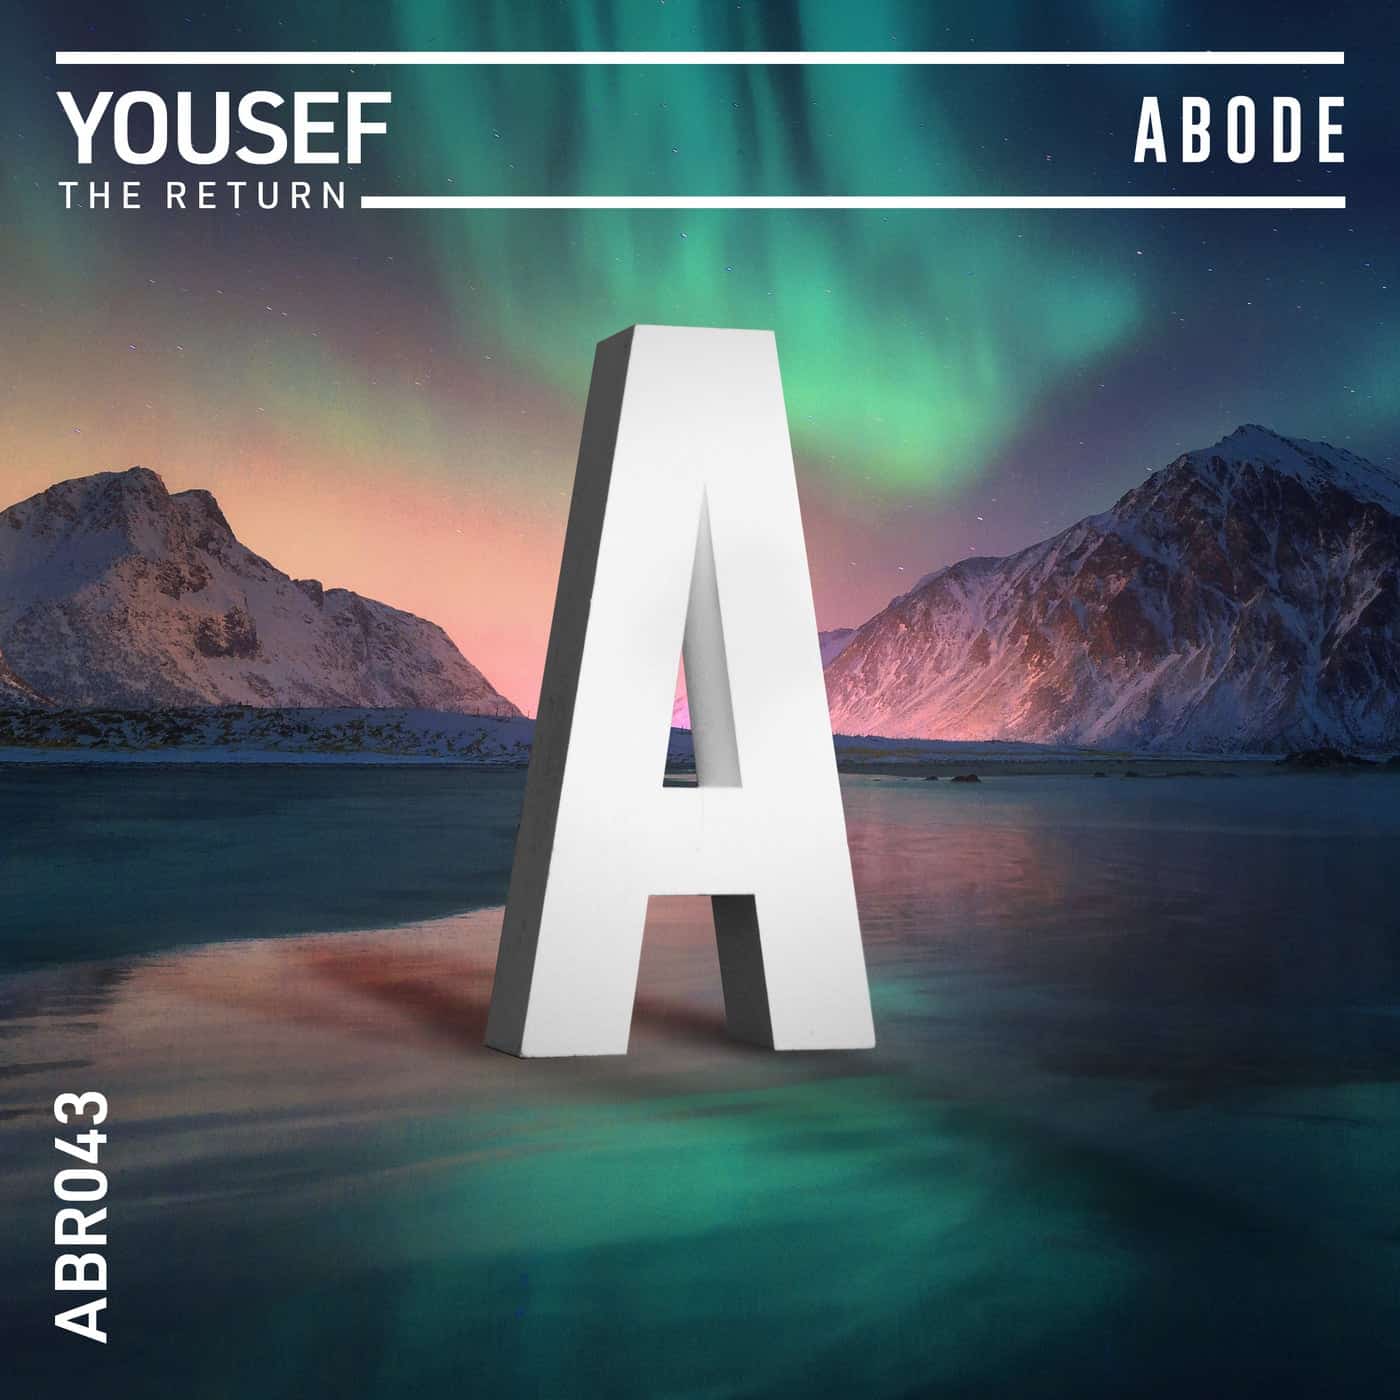 Download Yousef - The Return on Electrobuzz